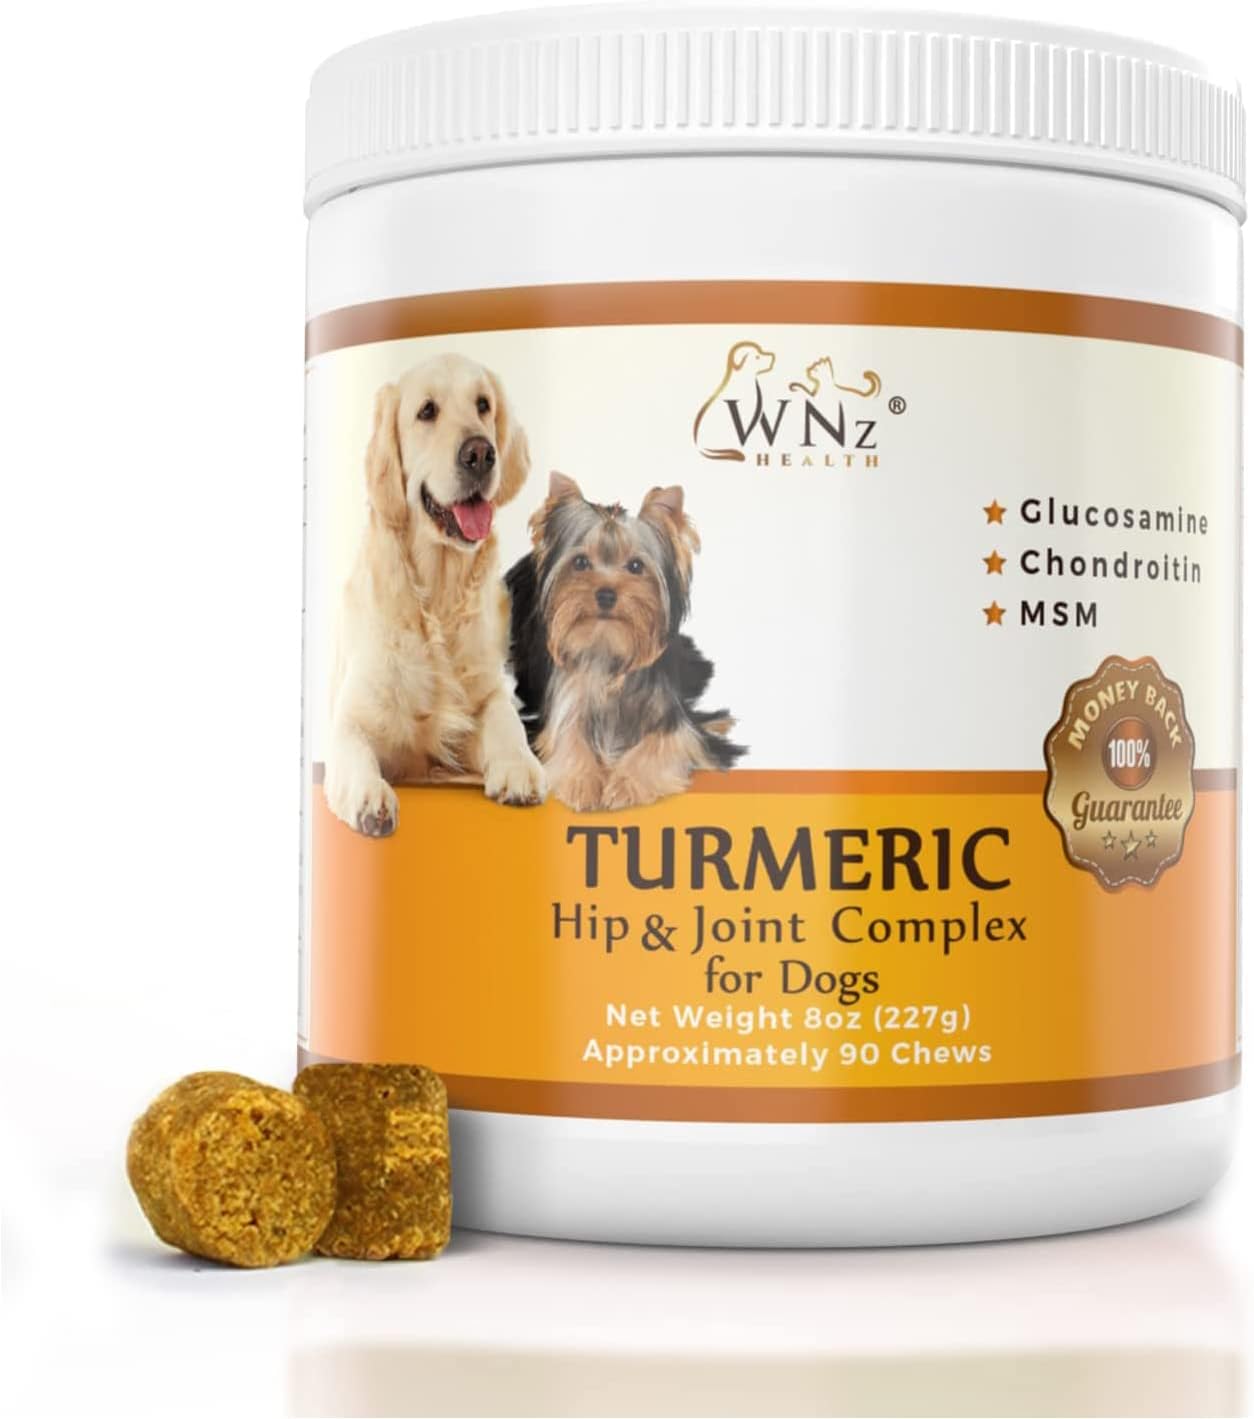 Turmeric Hip and Joint Chews for Dogs, Dog Chews for Mobility Support, Cartilage Health & Dog Joint Pain Relief, Anti-Inflammatory MSM, Glucosamine and Chondroitin for Dogs, 90 Chews, 8 Oz